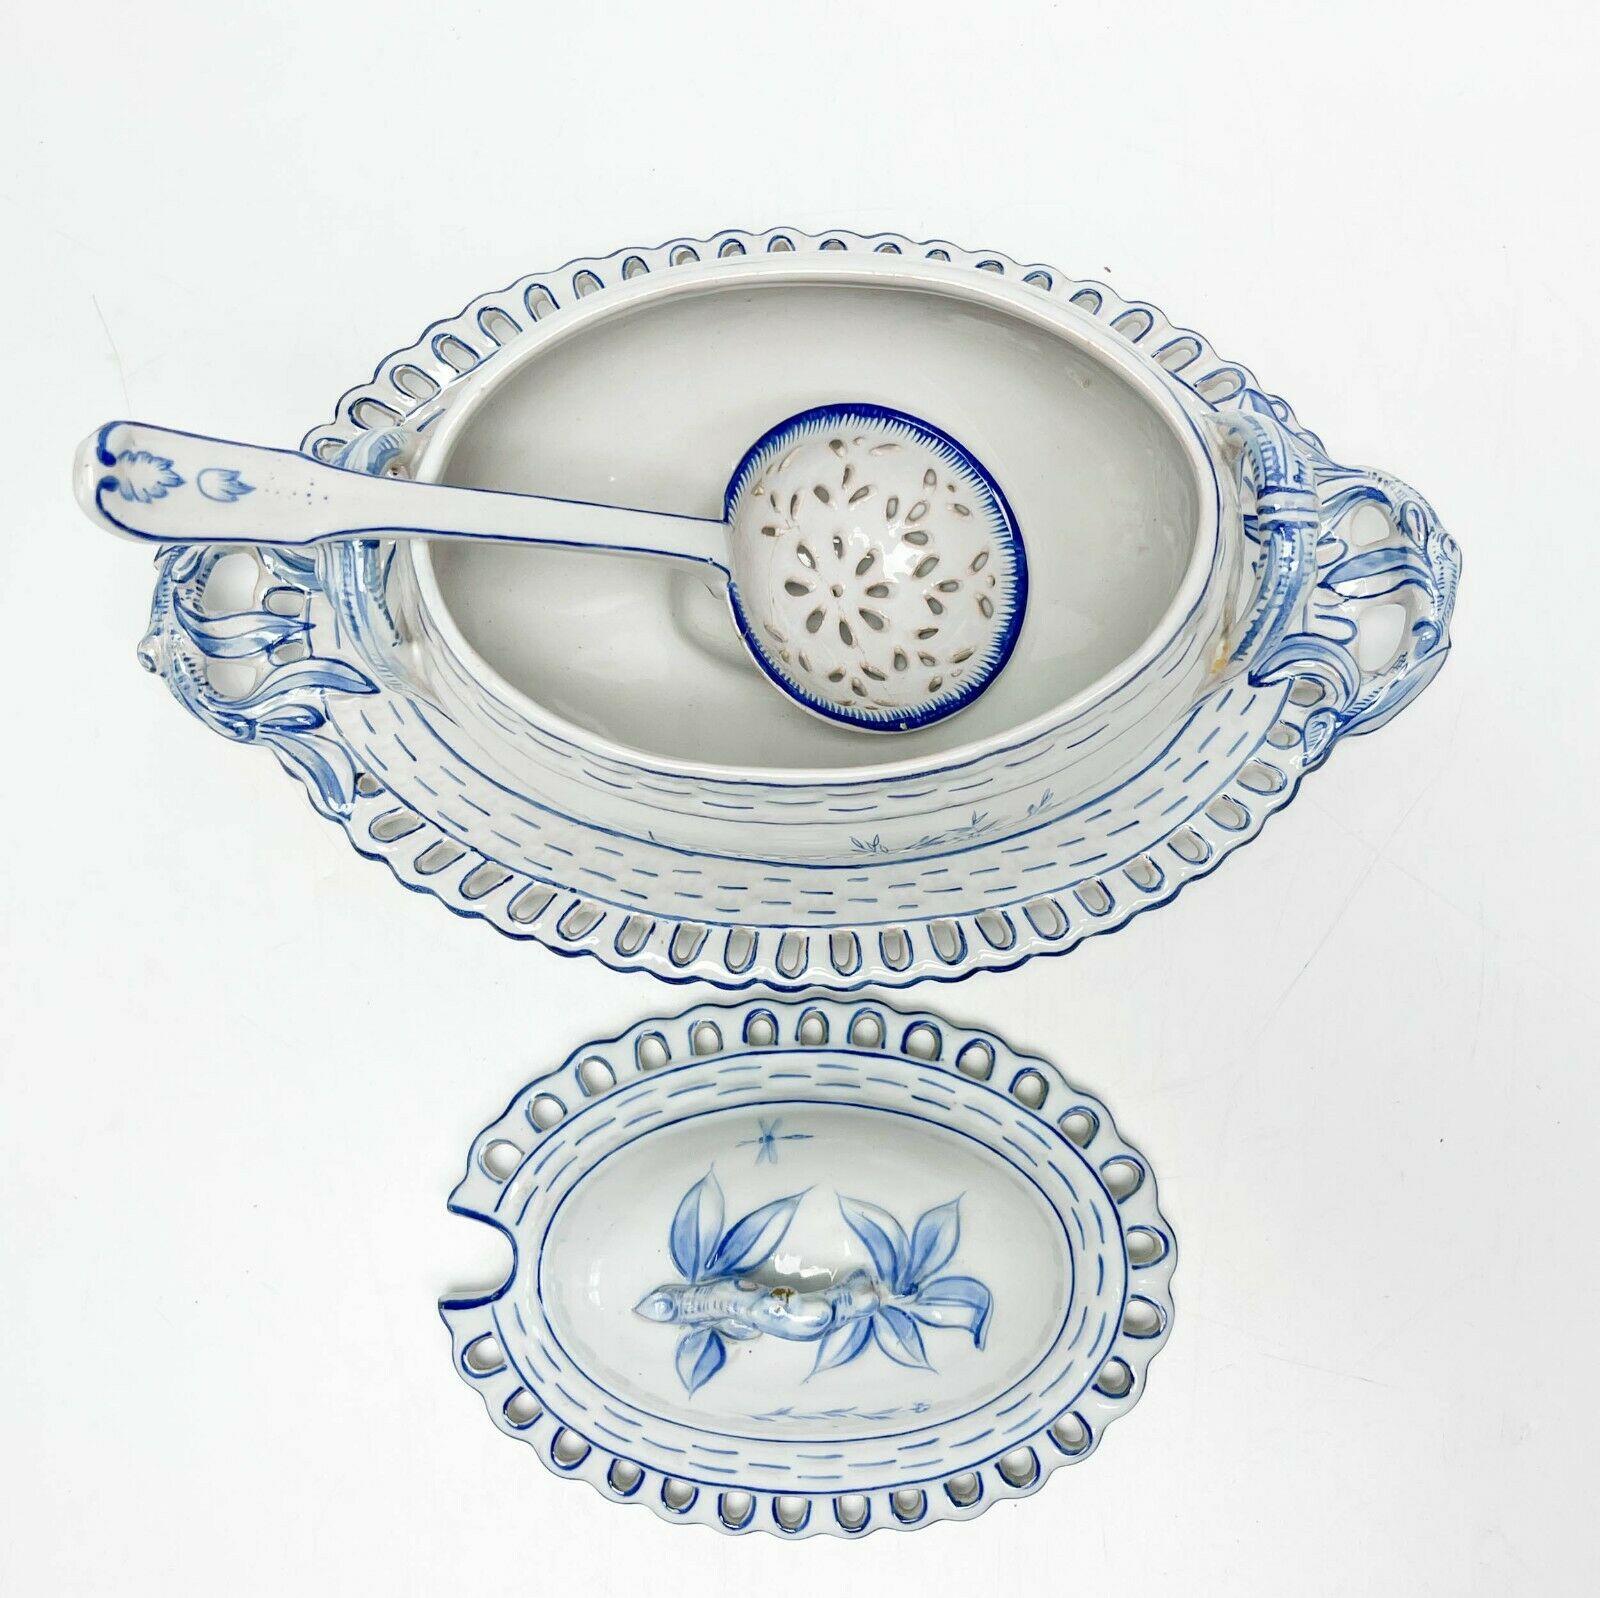 Galle Faience France Reticulated Porcelain Lidded Sauce Tureen with Assoc Spoon For Sale 1